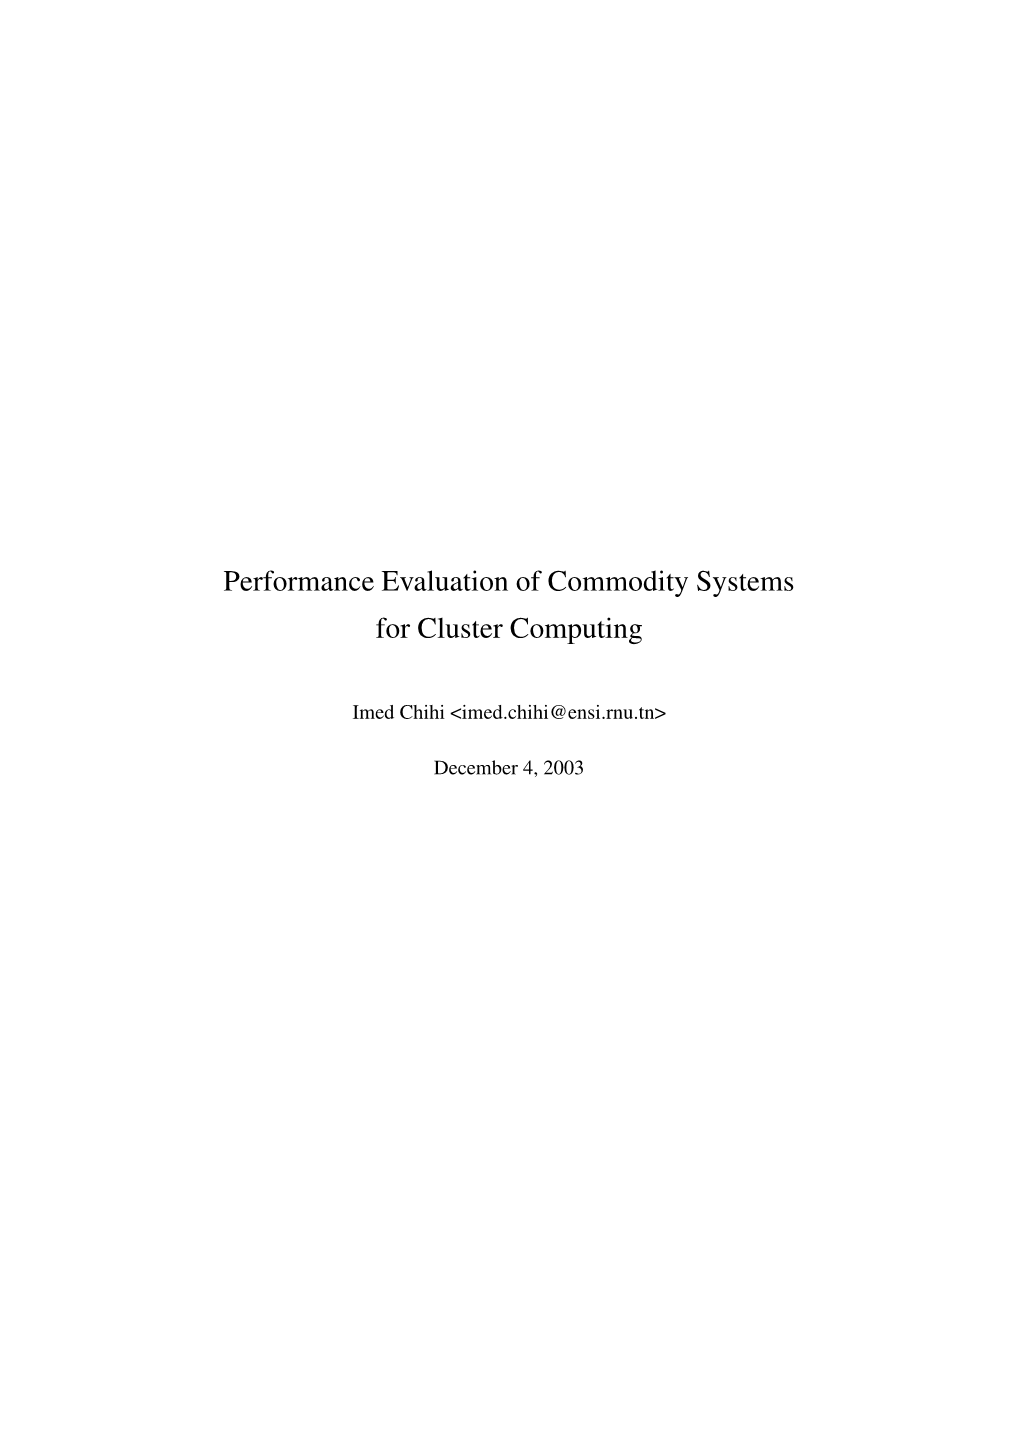 Performance Evaluation of Commodity Systems for Cluster Computing